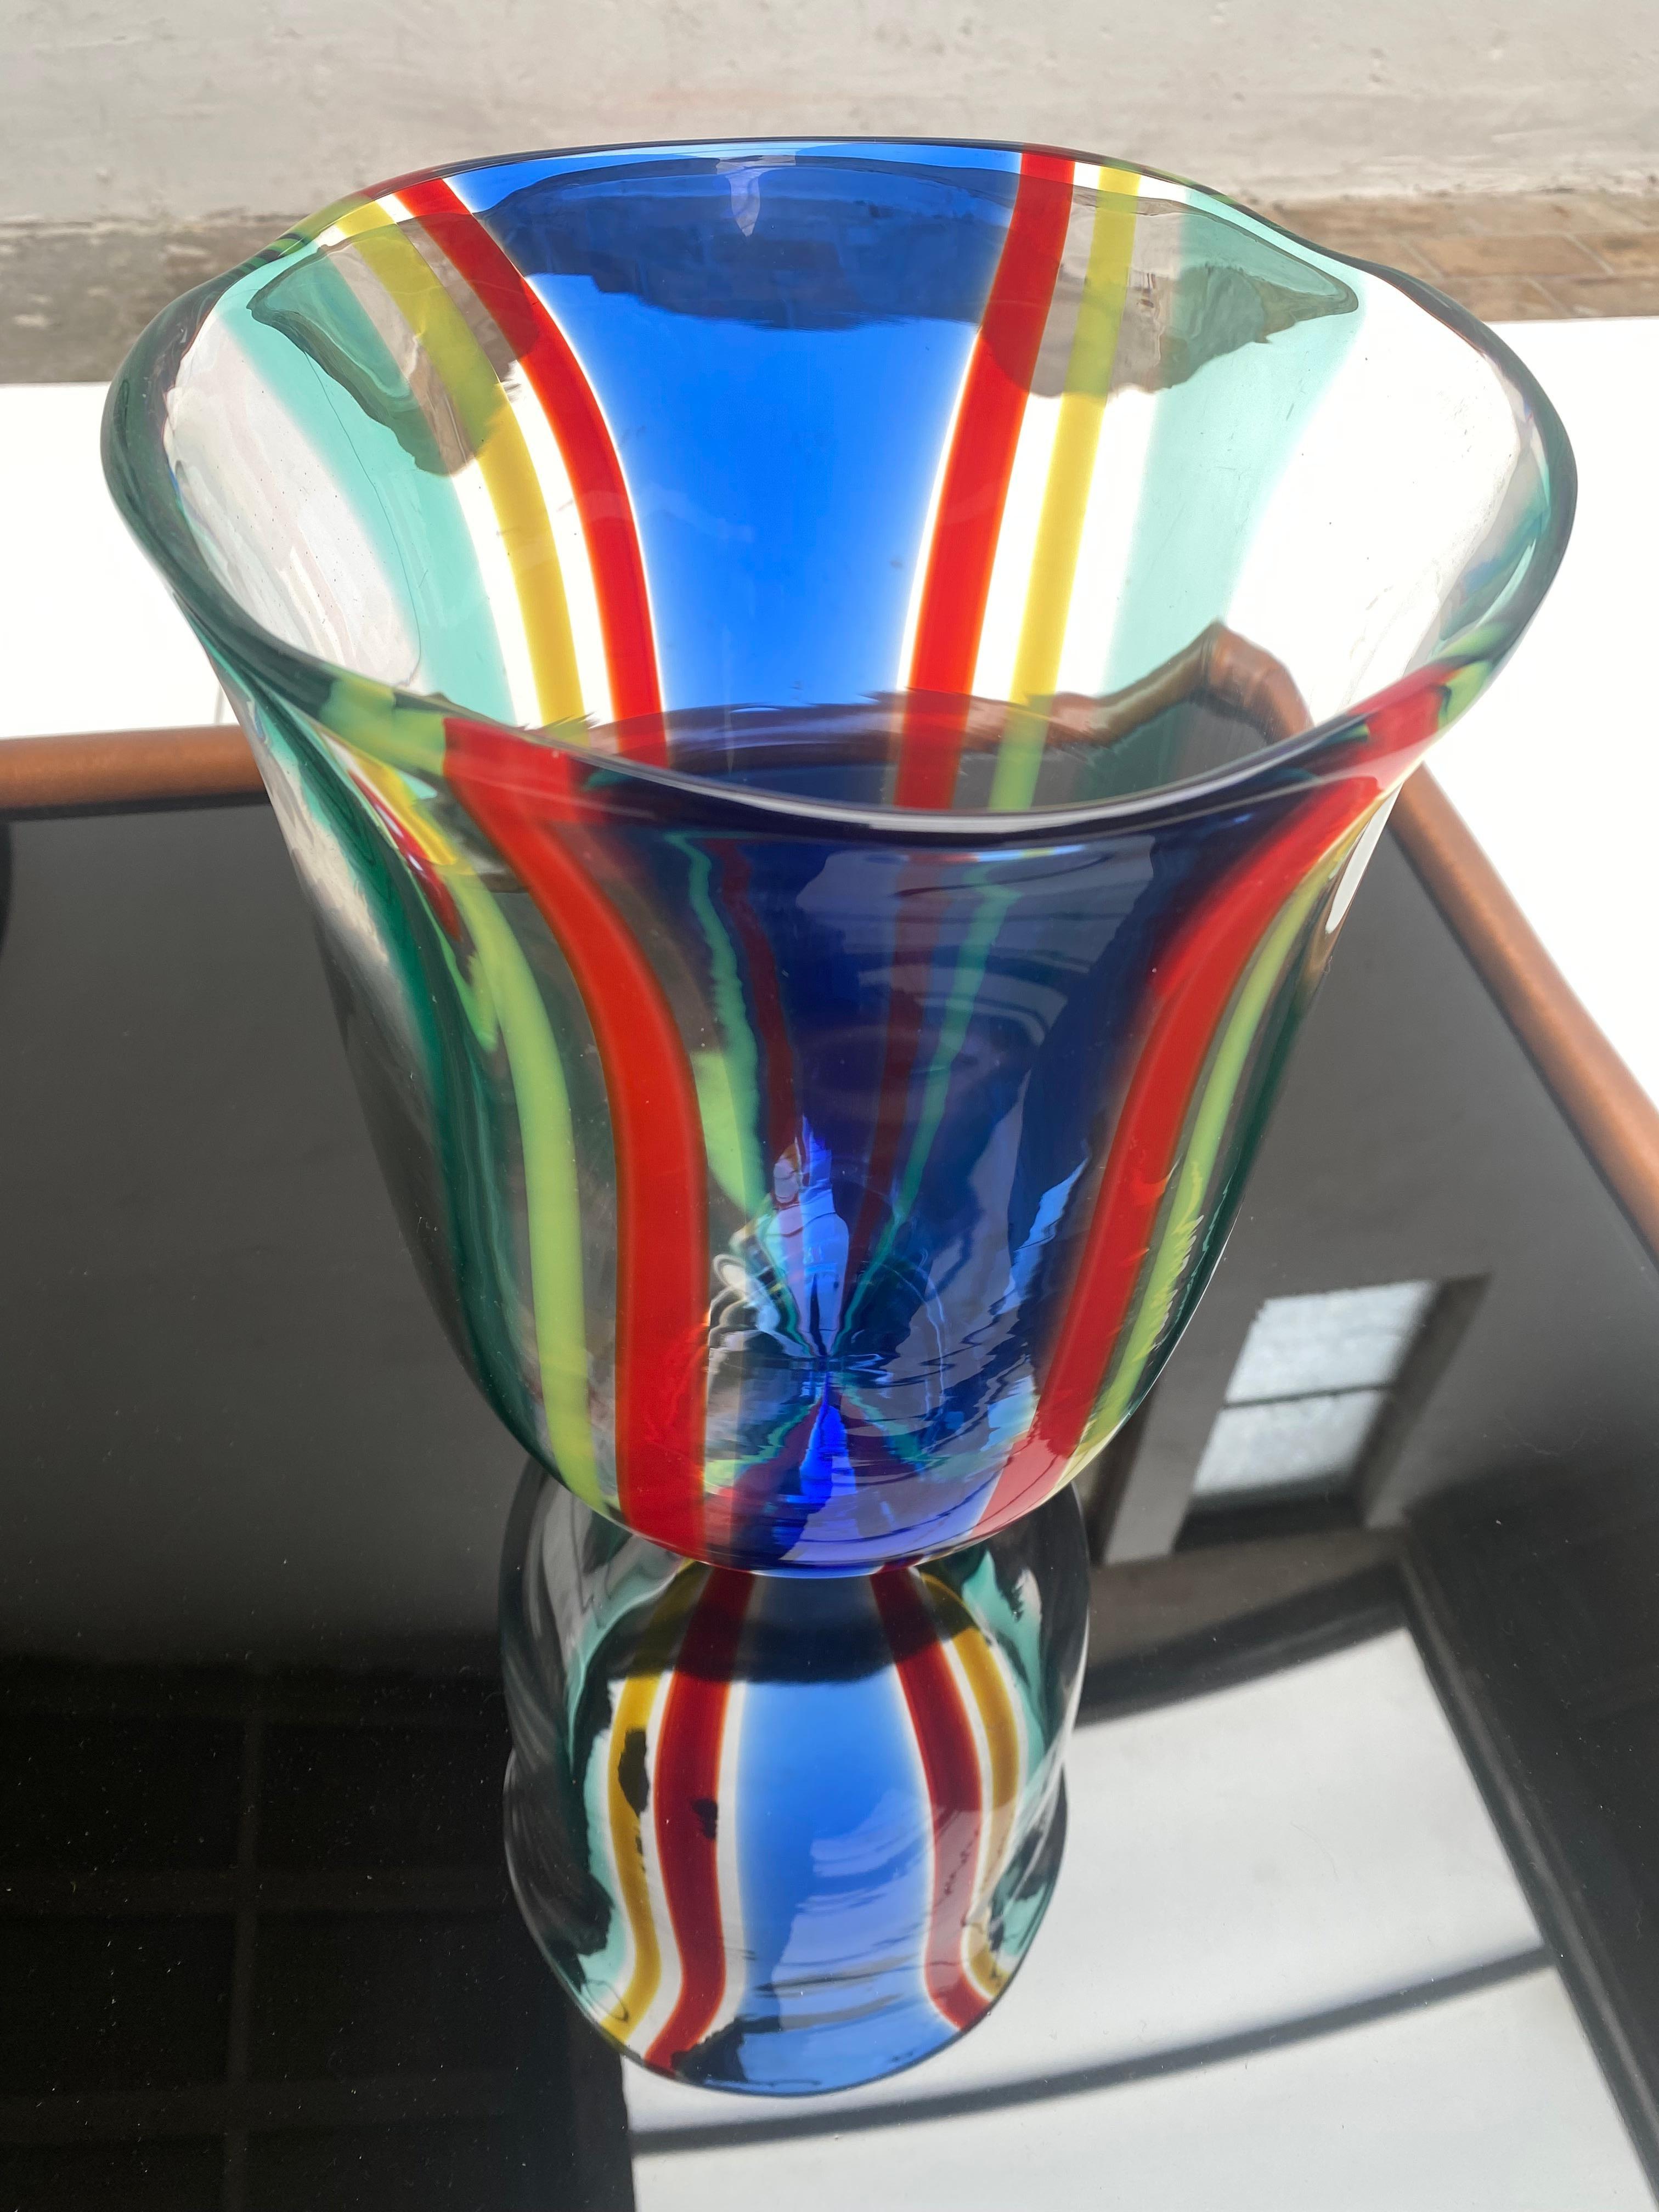 Large Murano glass 'Camille' vase by Berit Johansson for Salviati Italy 1991

This Camille vase comes in mint condition in its original packing 

Engraved to the underside 'Salviati B. Johannson 91'

A Wonderful colorful & playful Murano glass vase